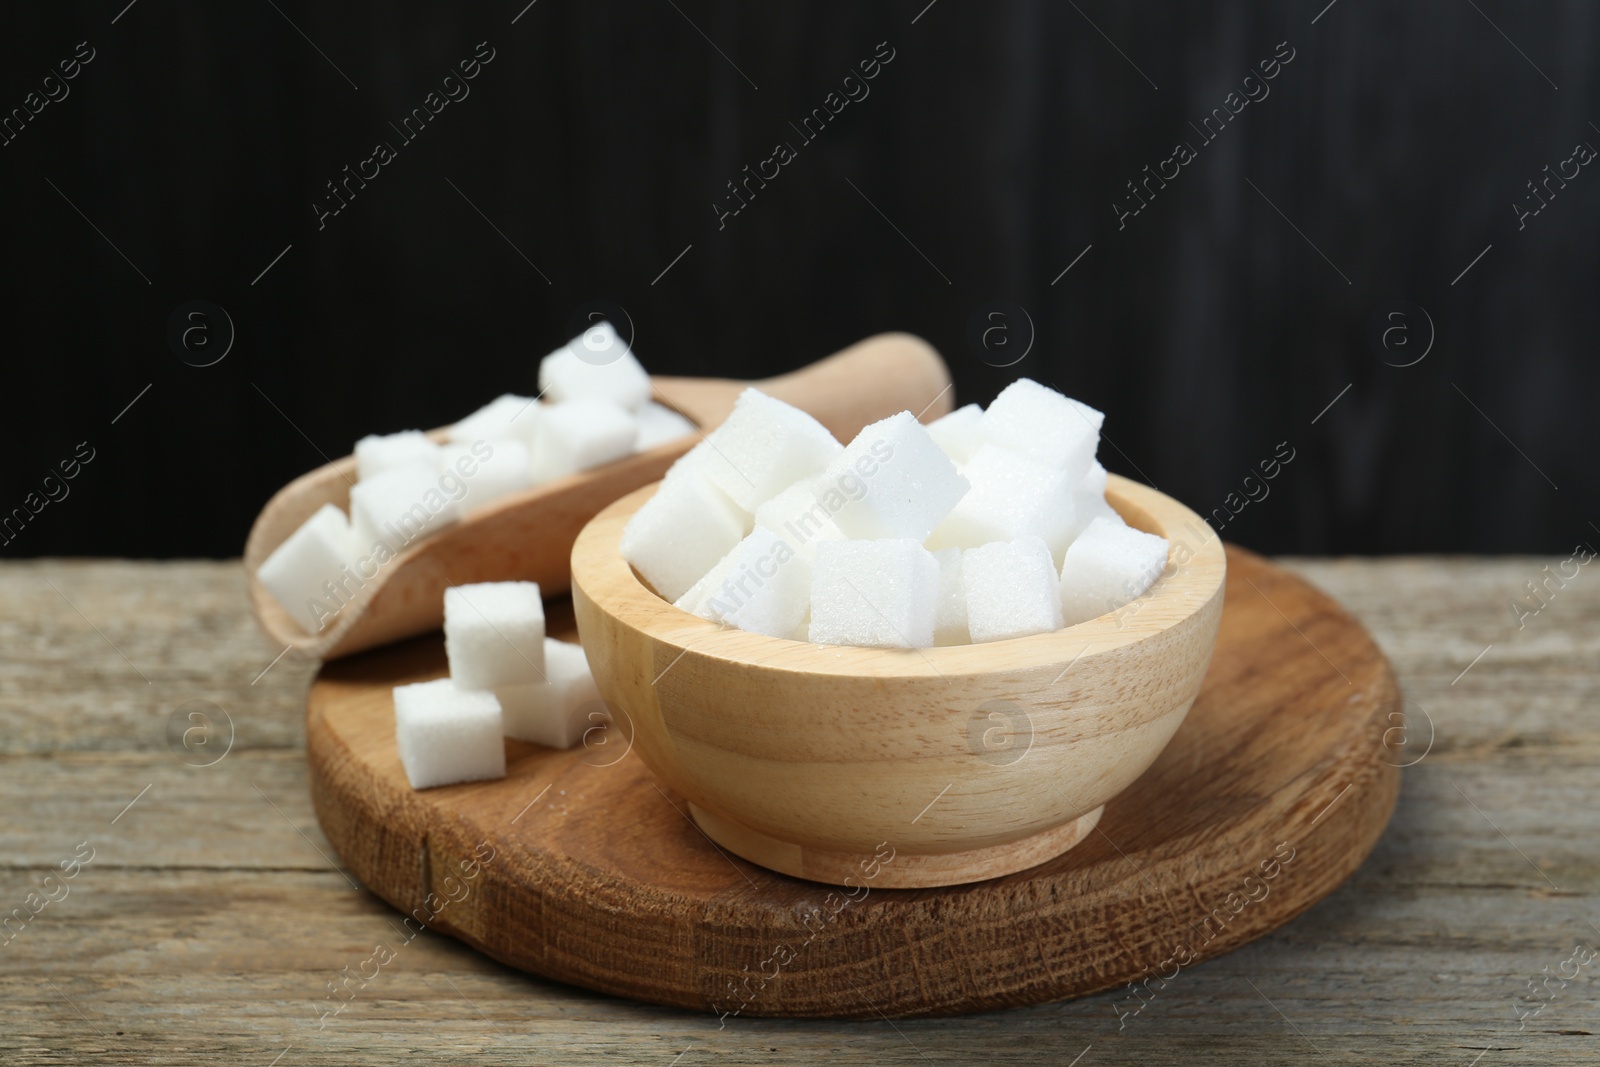 Photo of White sugar cubes in bowl and scoop on wooden table against dark background, closeup